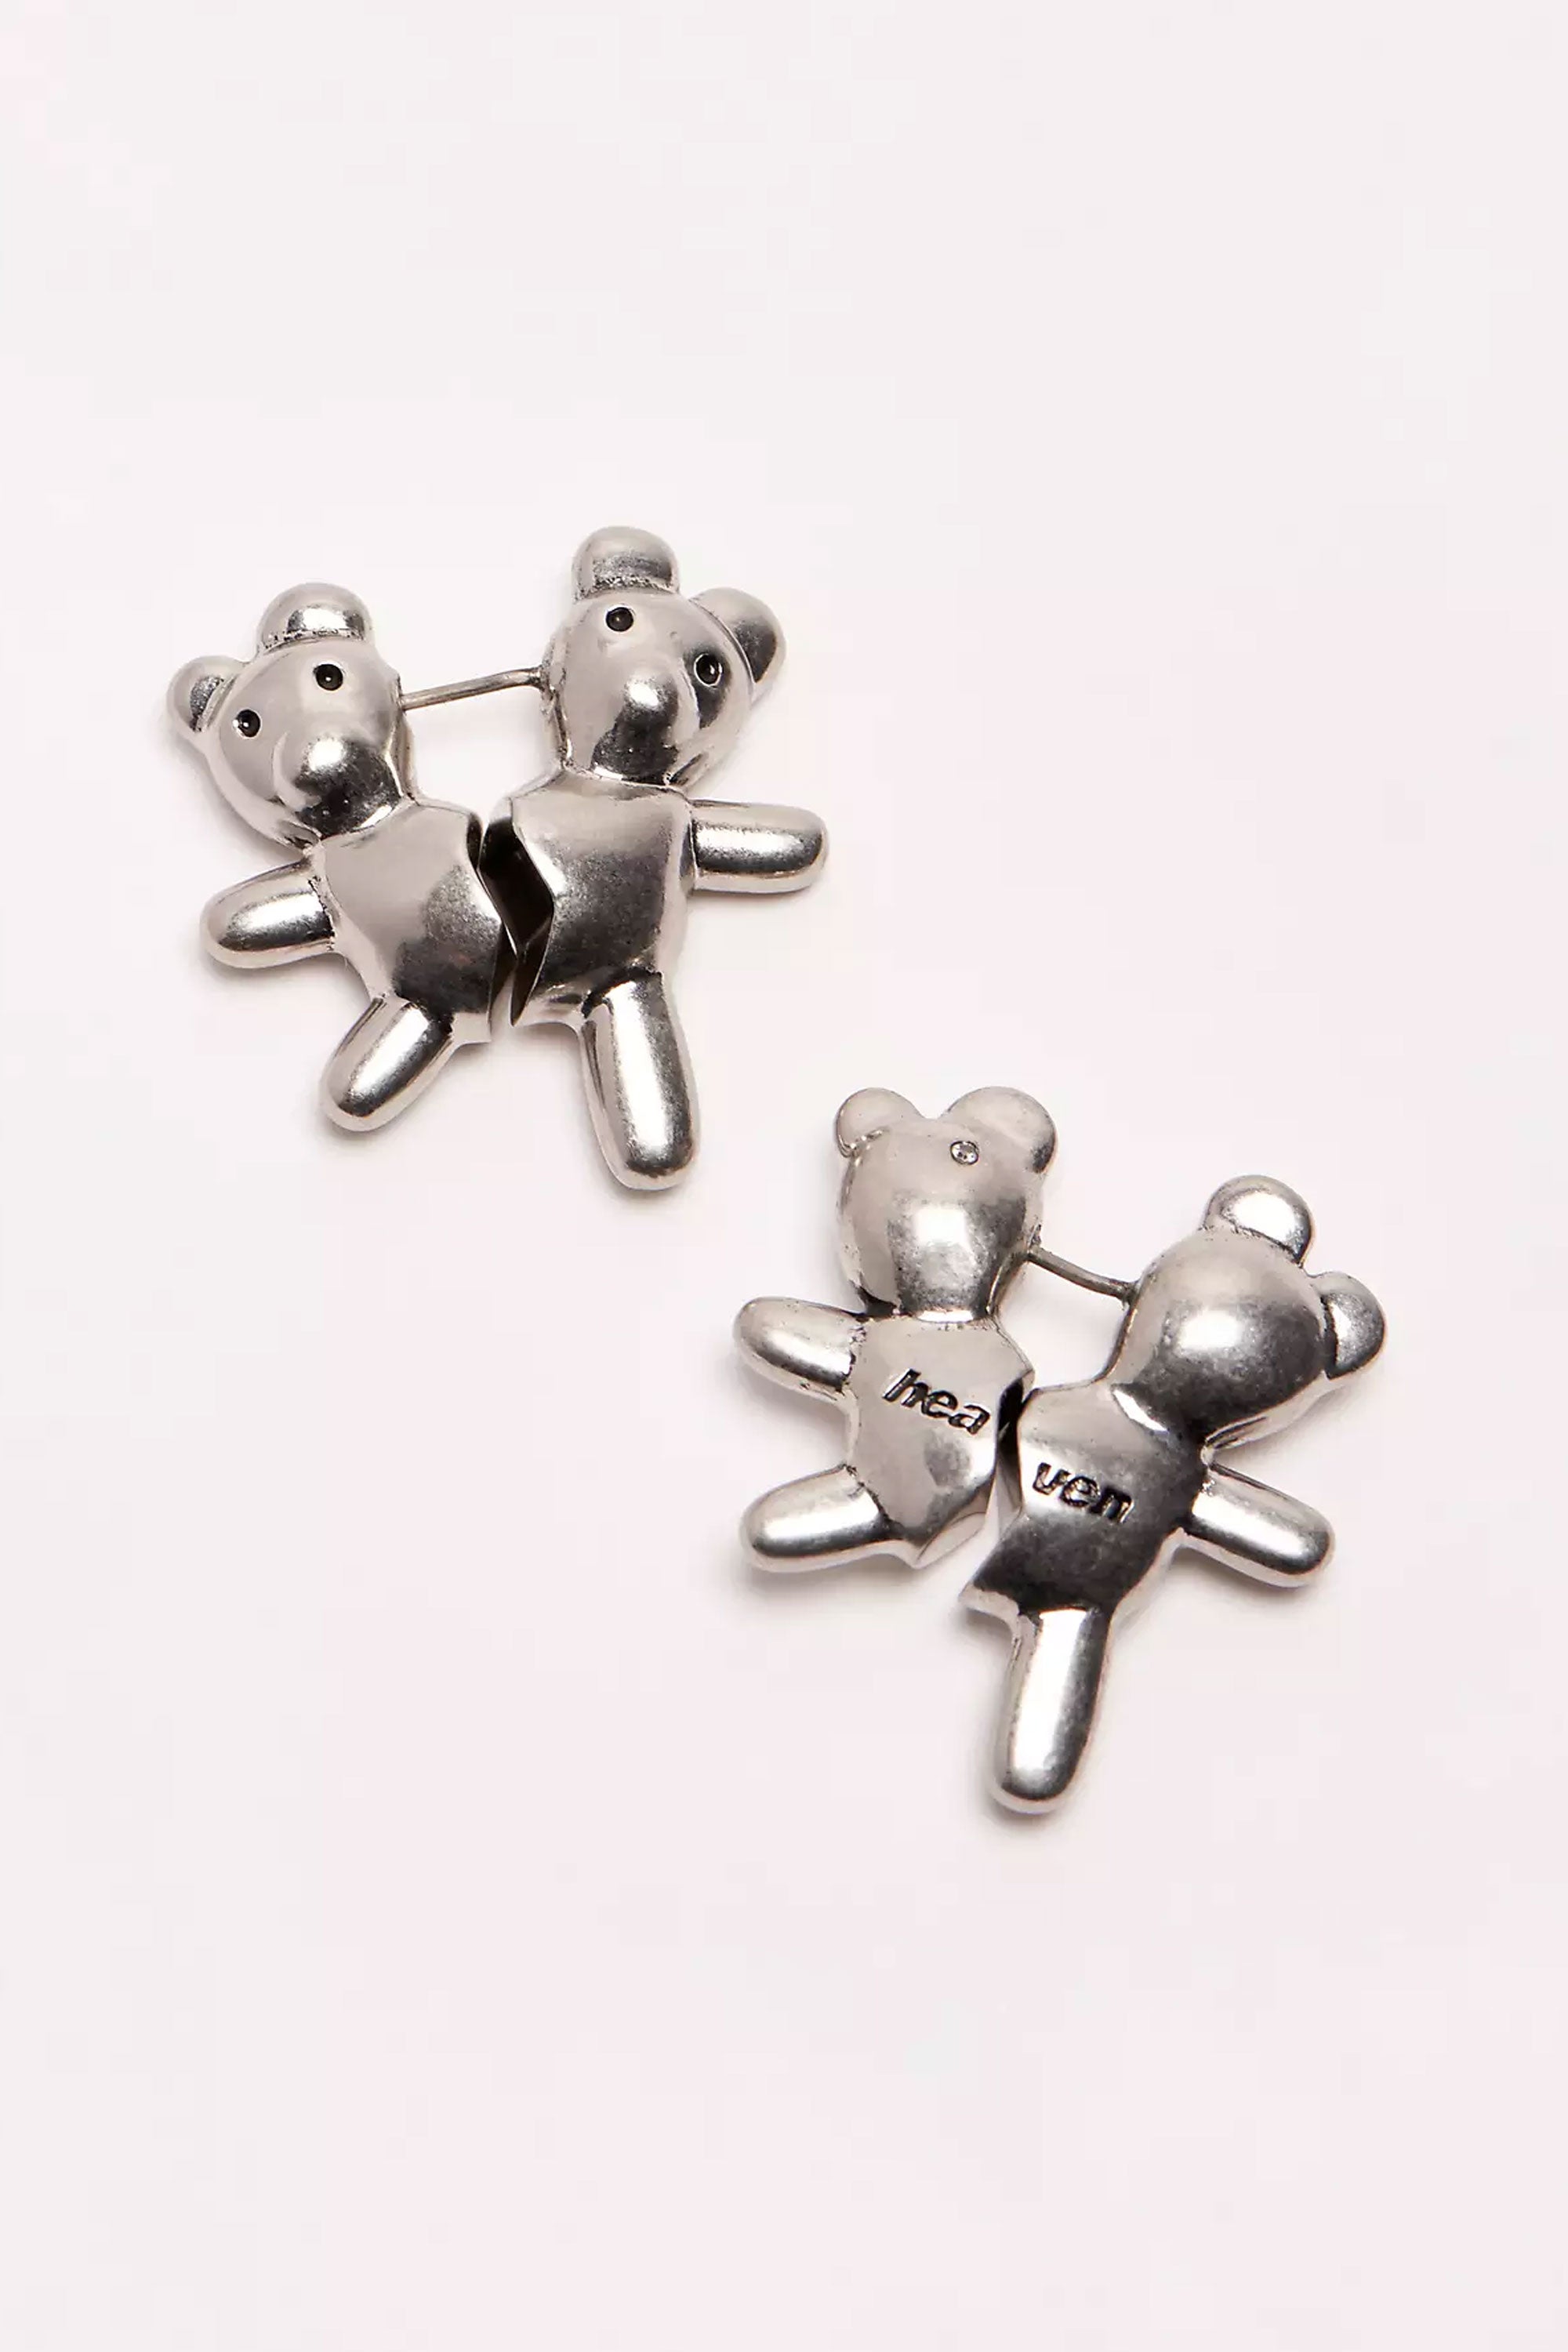 The HEAVEN - HEAVEN TEDDY HUG EARRINGS  available online with global shipping, and in PAM Stores Melbourne and Sydney.